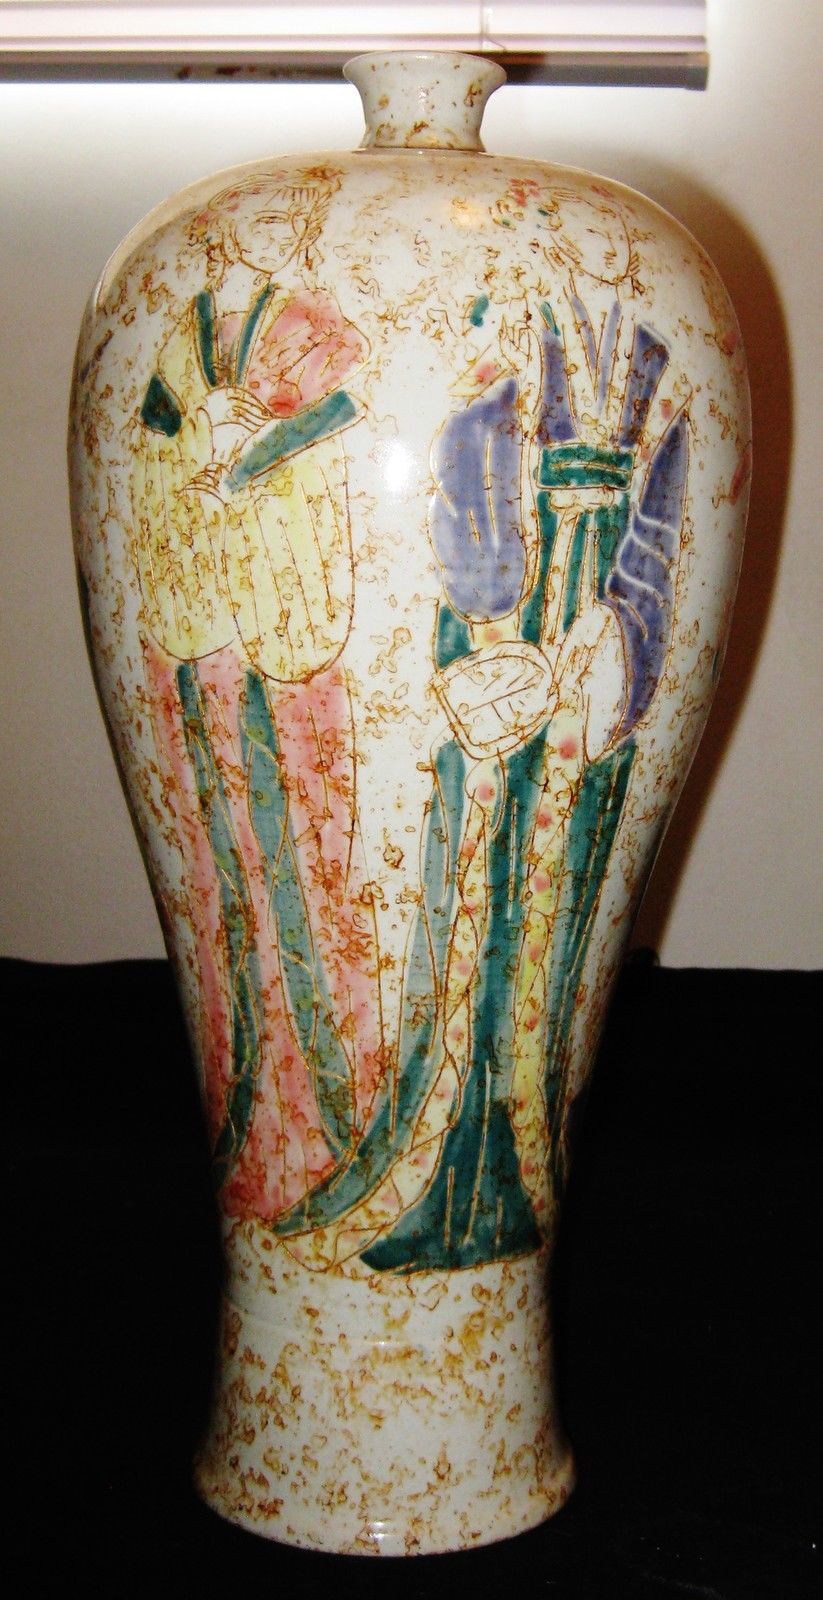 Antique Chinese Song Dynasty Pottery Blosom Plum Vase, 12th-13th Century.